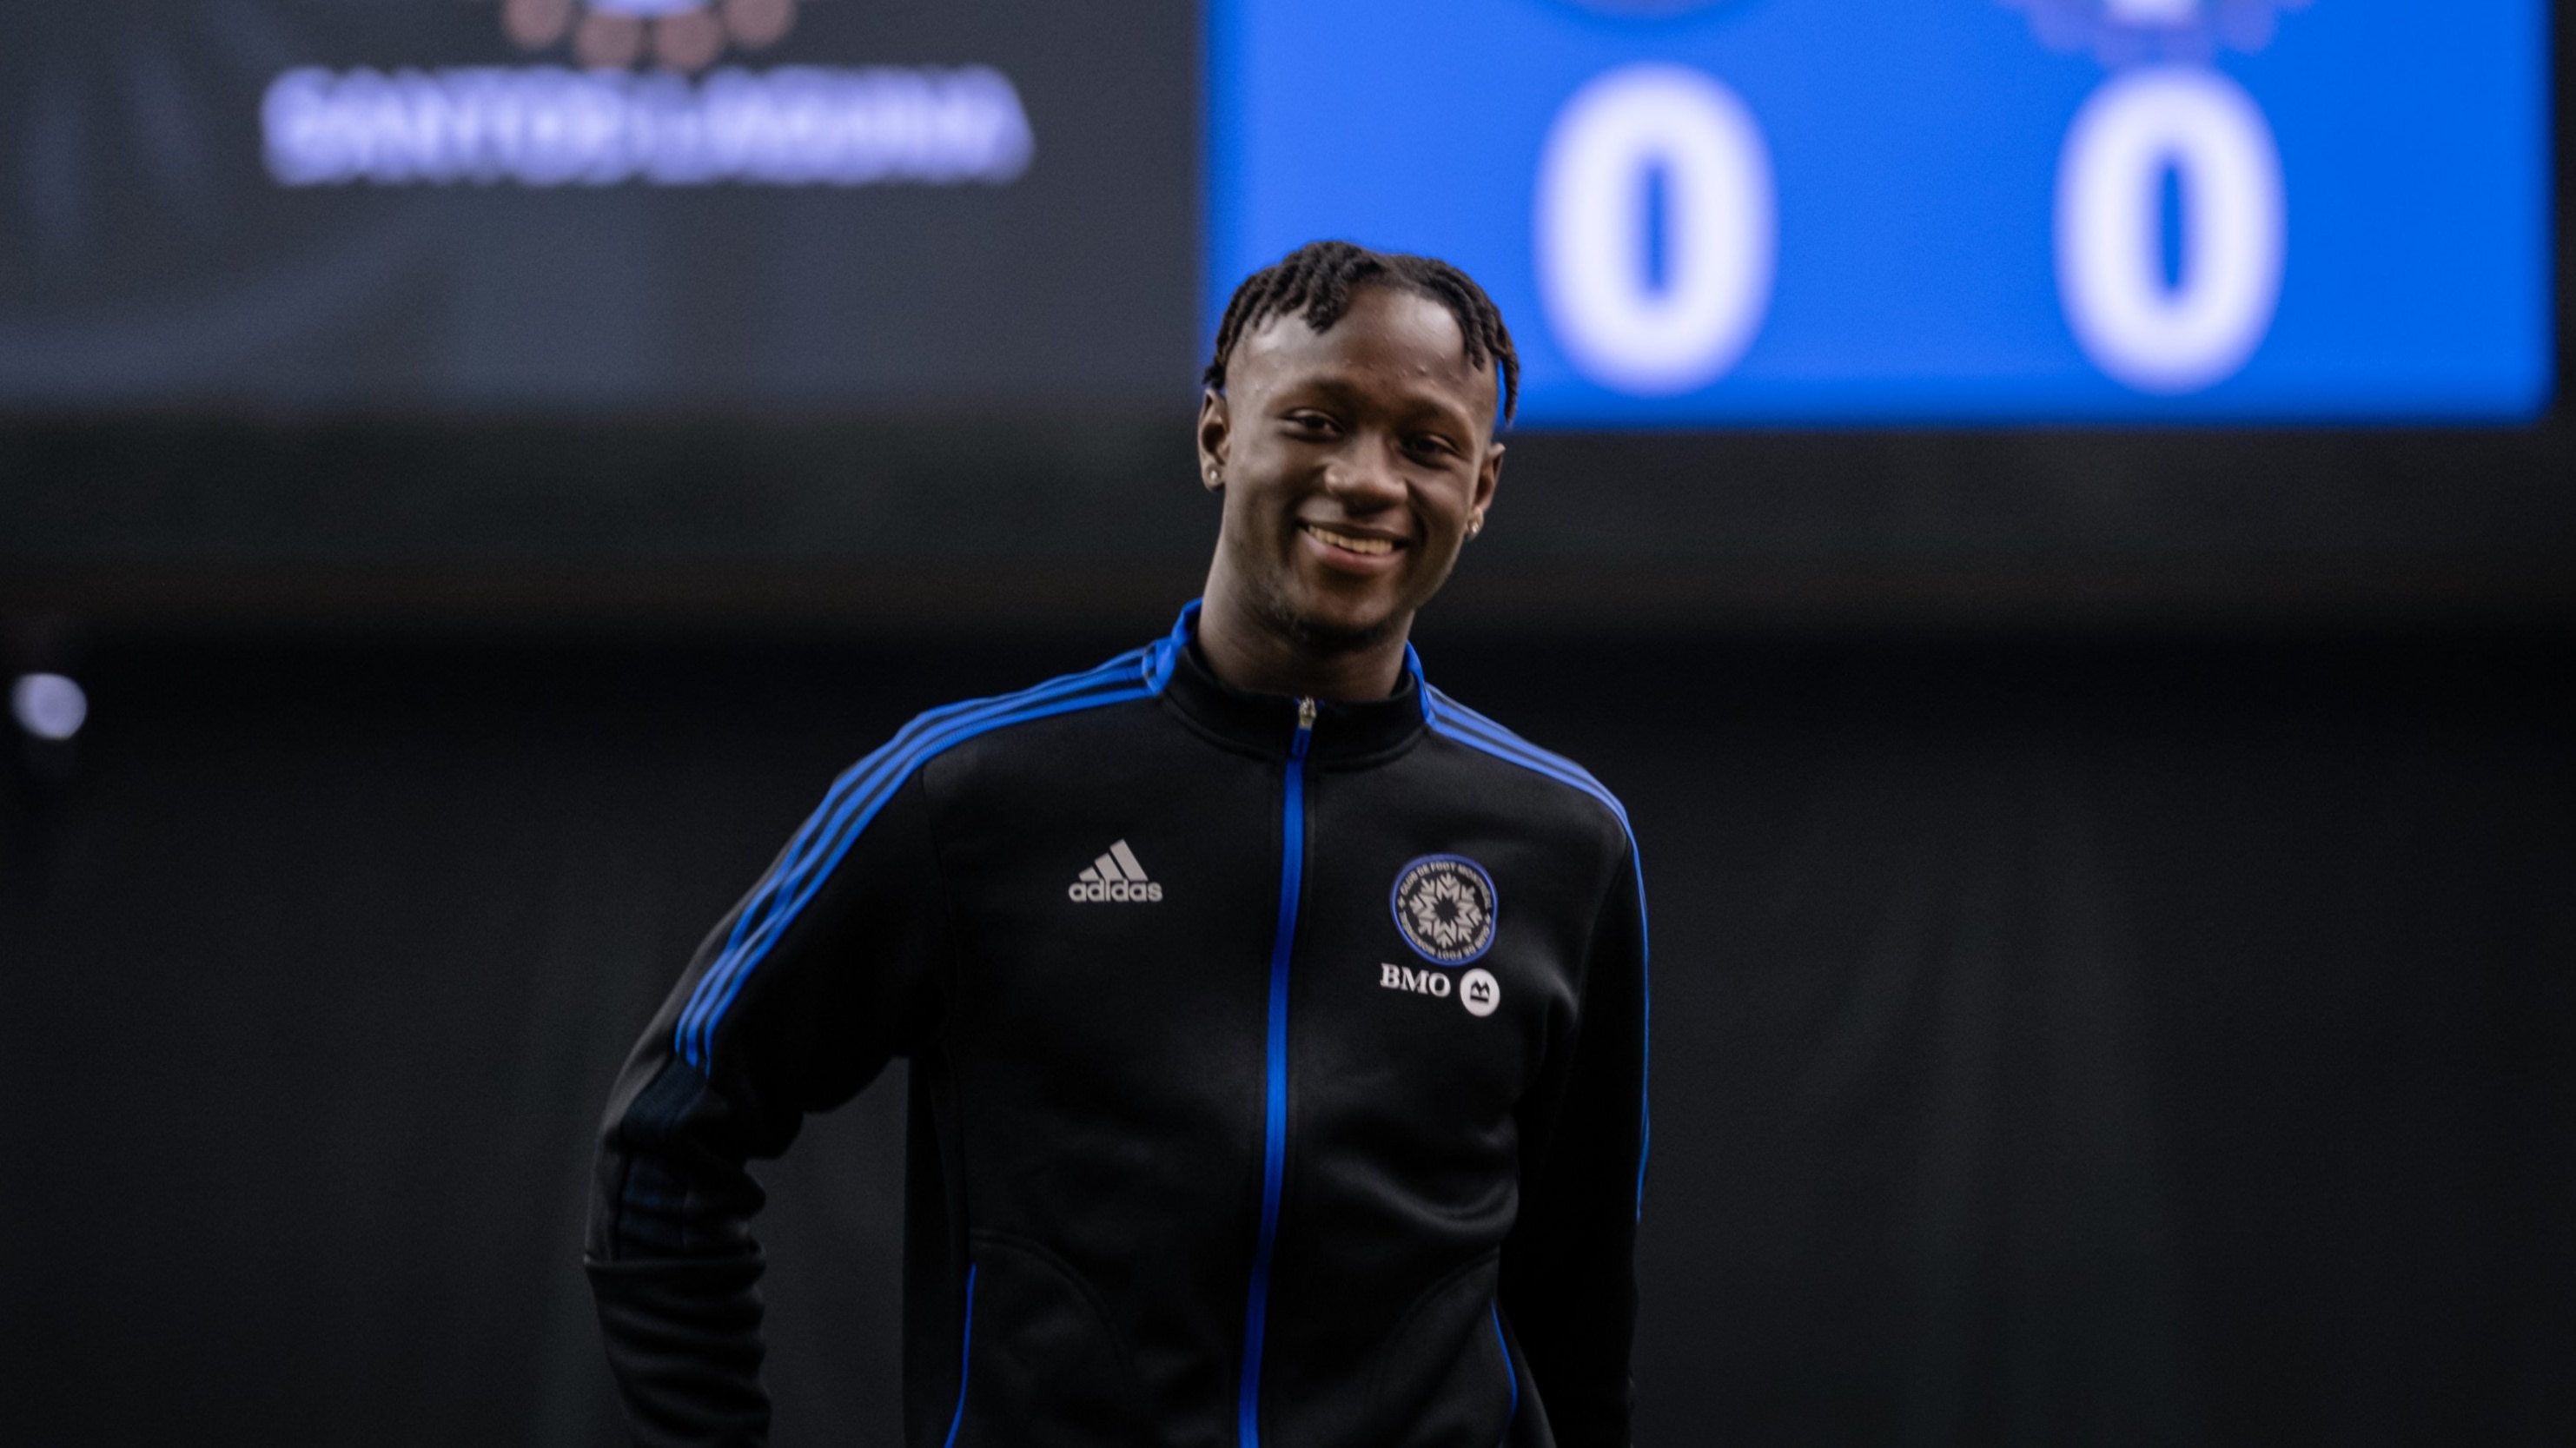 CF Montréal breakout star Ismael Kone gets the call-up with Canada on brink of World Cup qualification | MLSSoccer.com